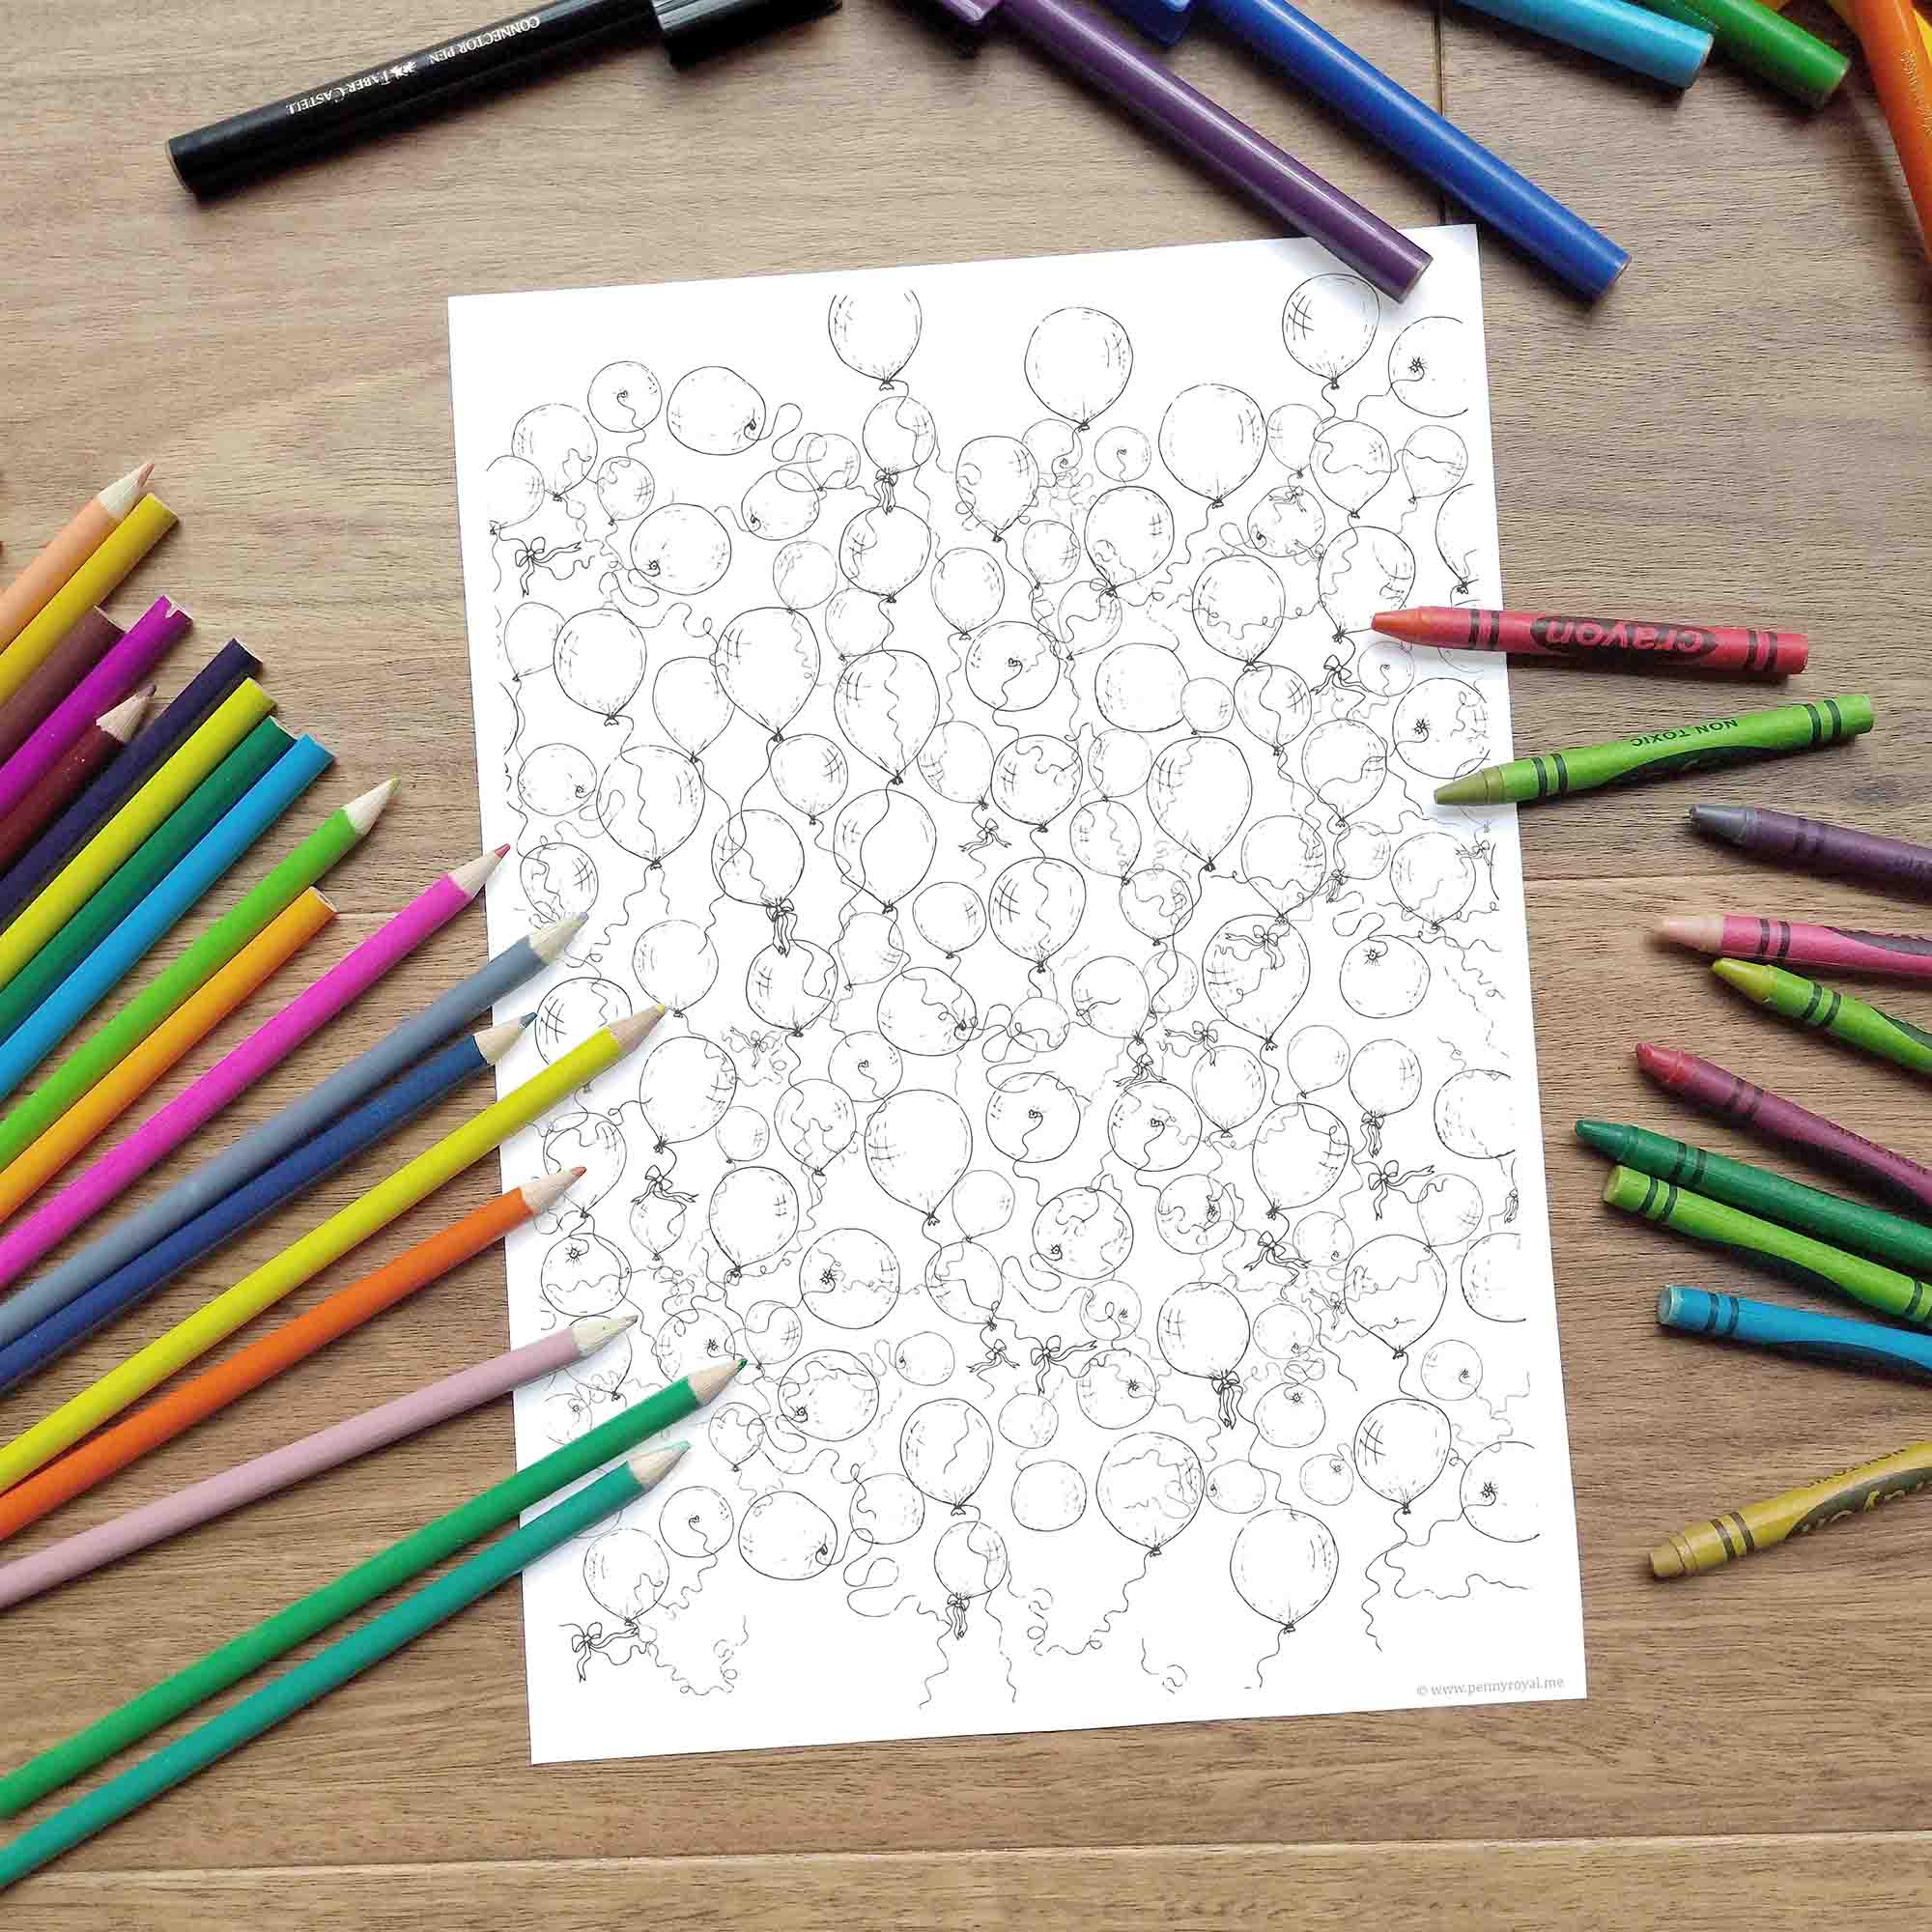 Sky full of balloons coloring page â digital download